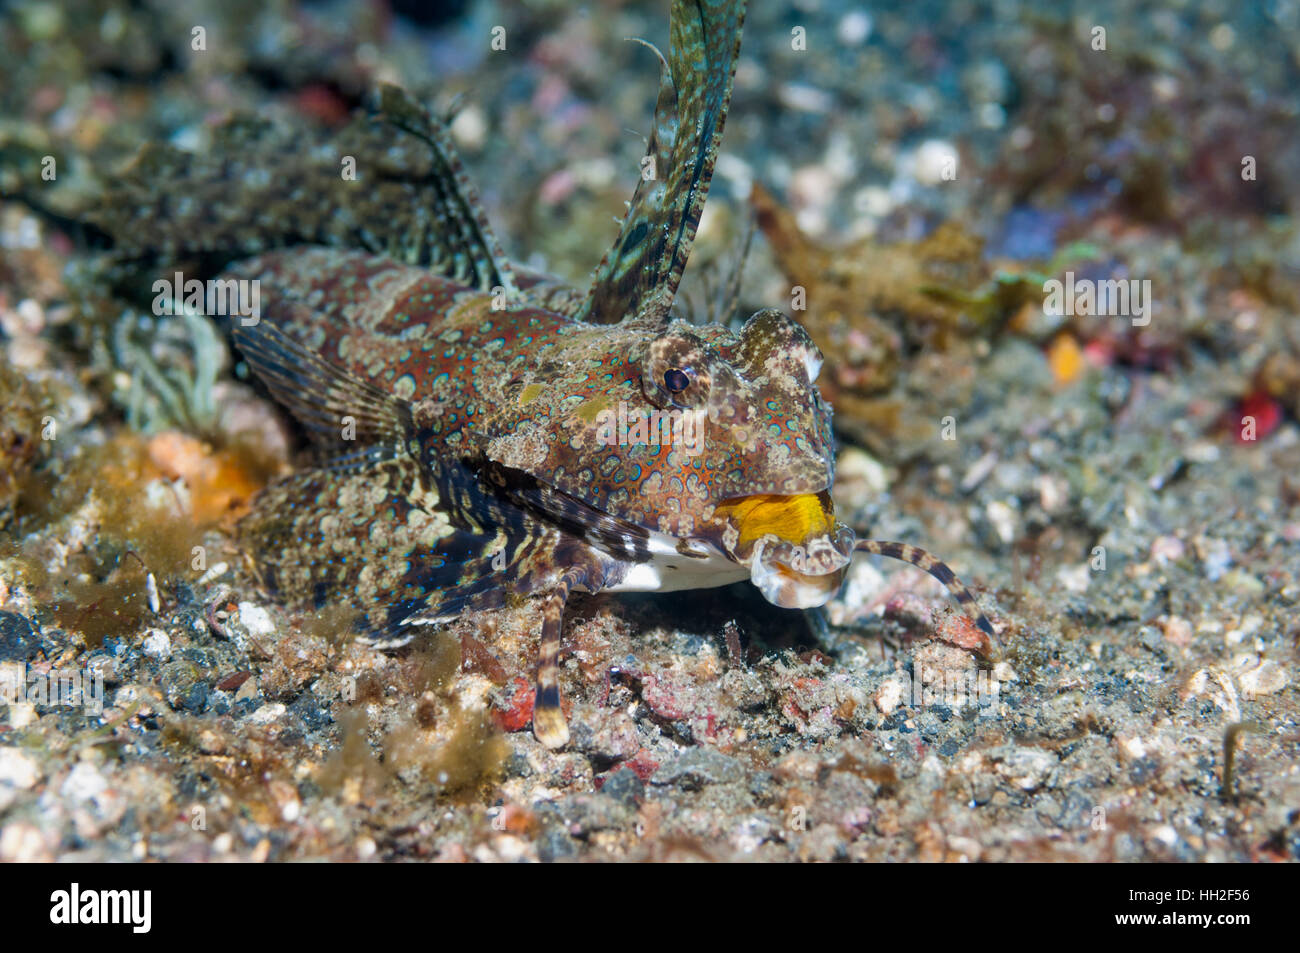 [Dragonet Synchiropus sp.] Lembeh strait, Nord Sulawesi, Indonesia. Foto Stock